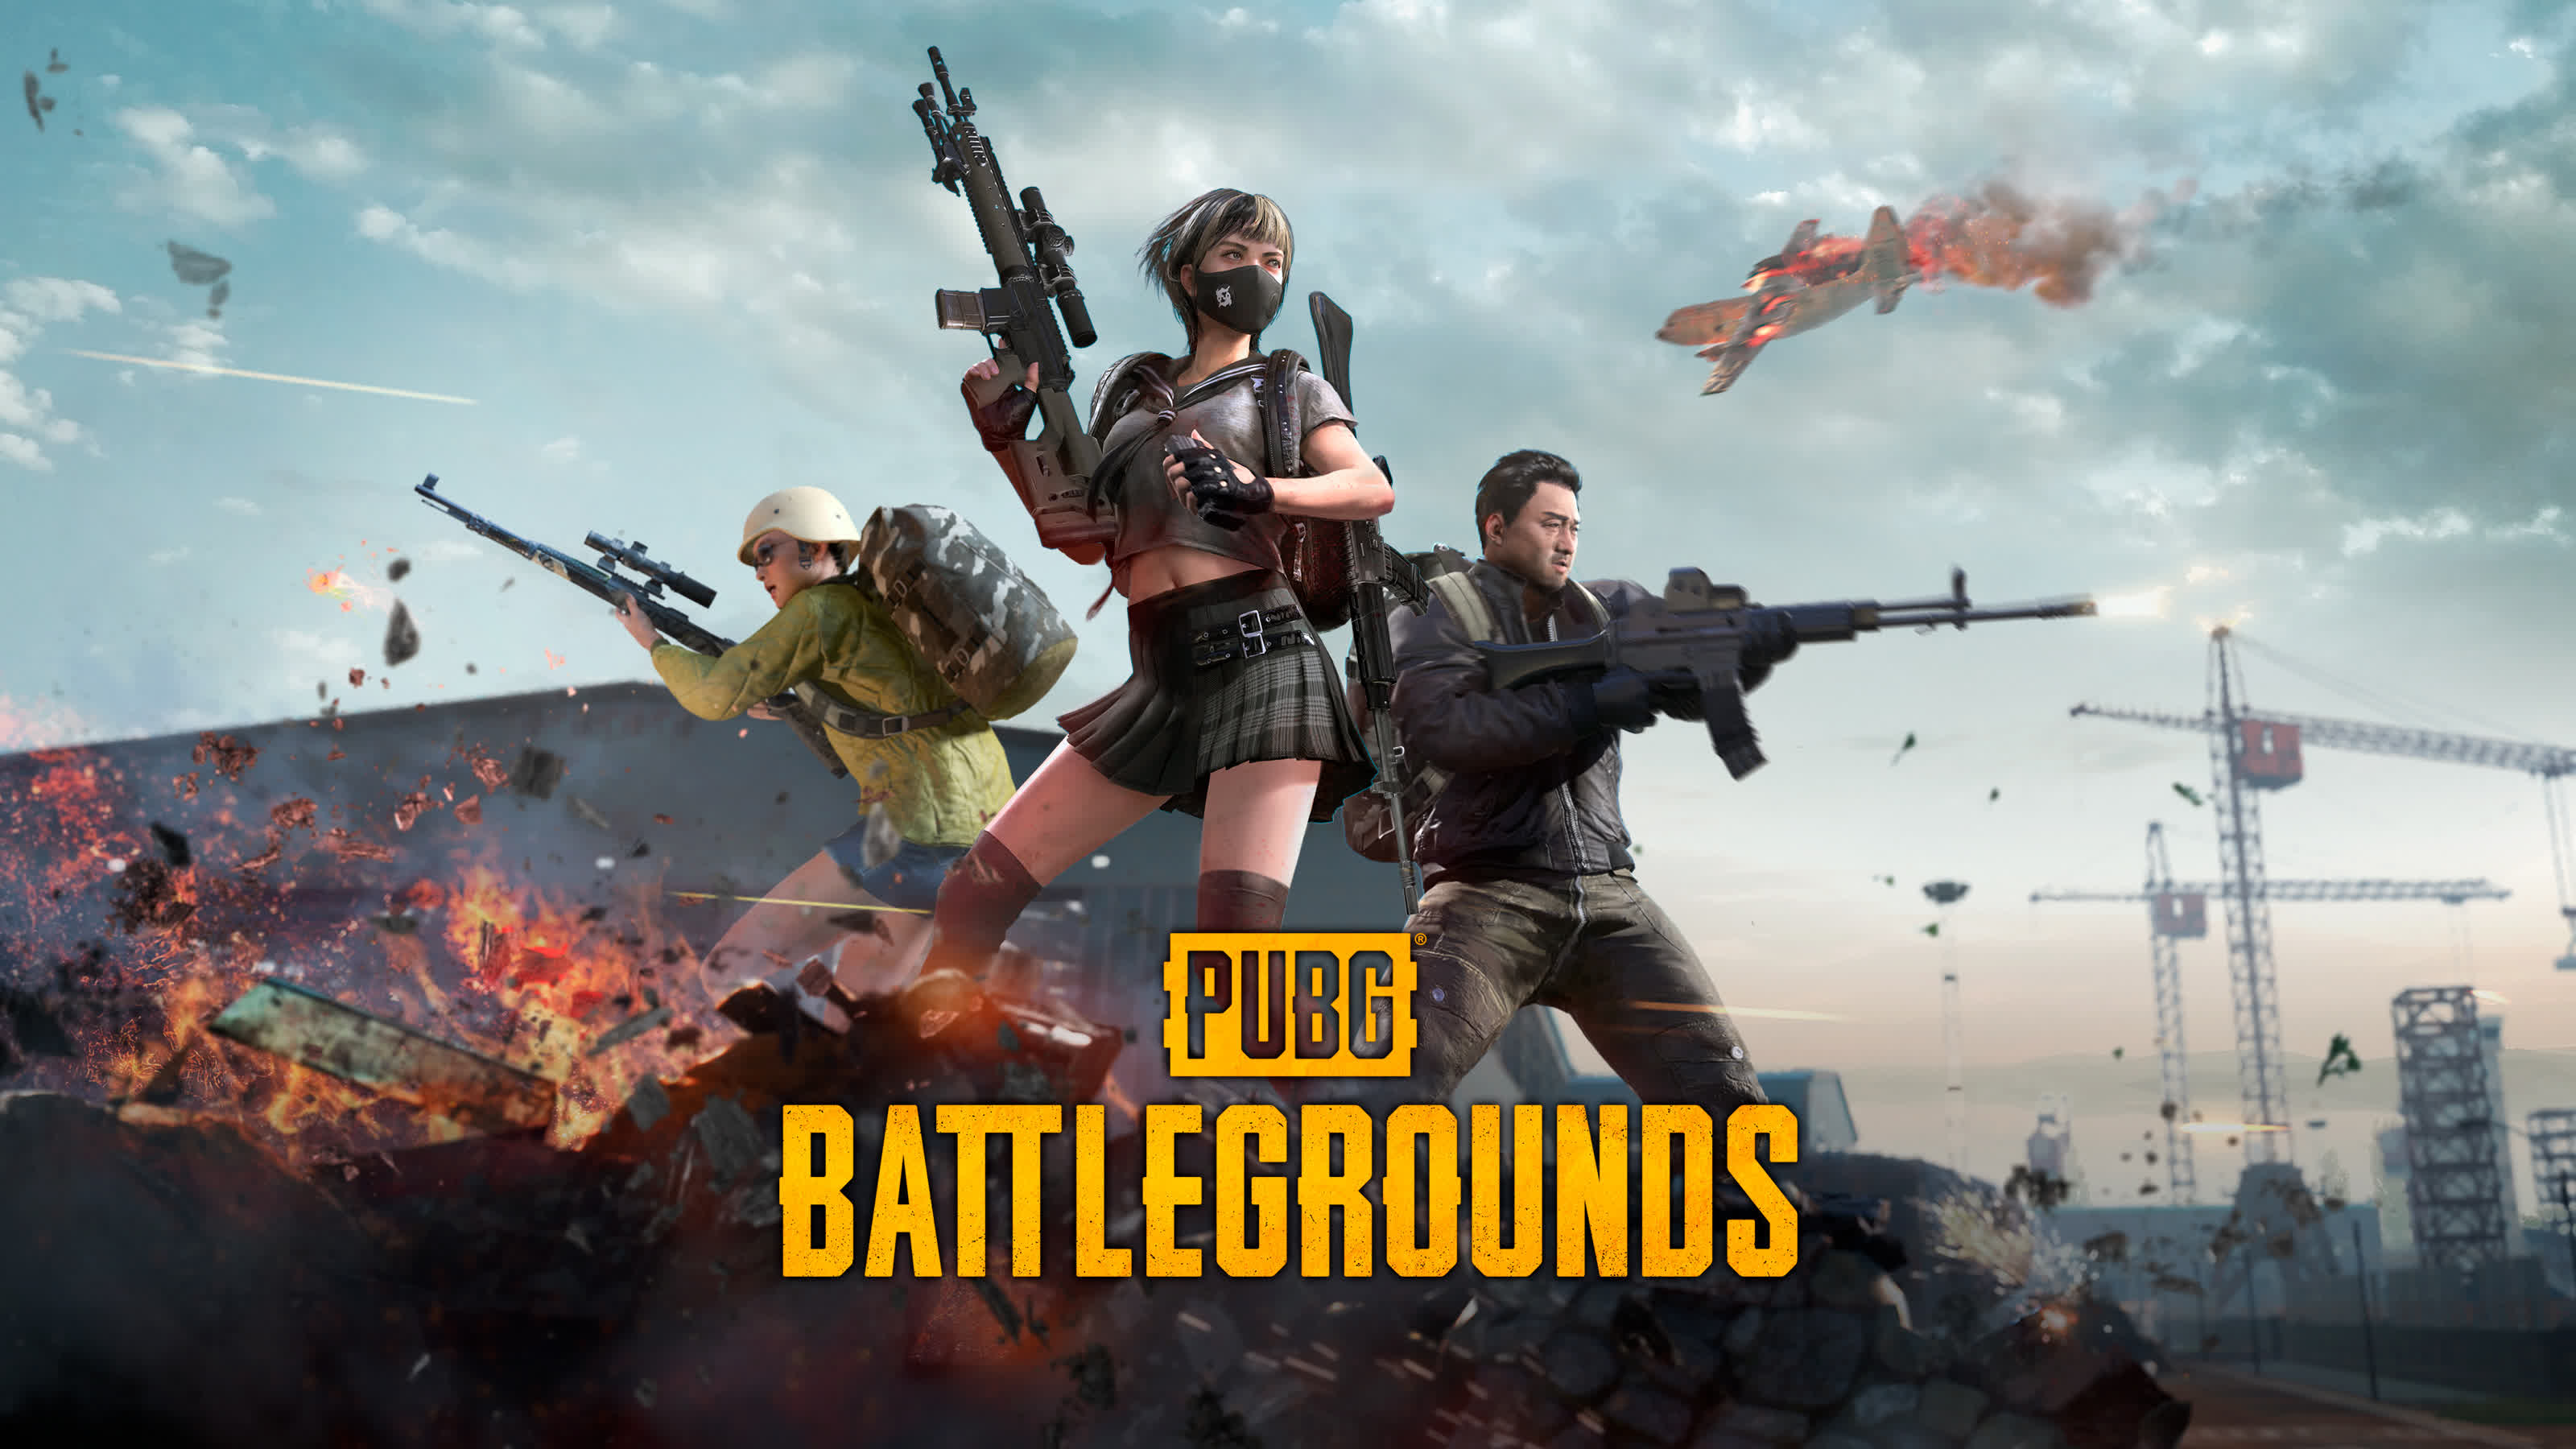 Castlevania producer is working on a PUBG animated project | TechSpot